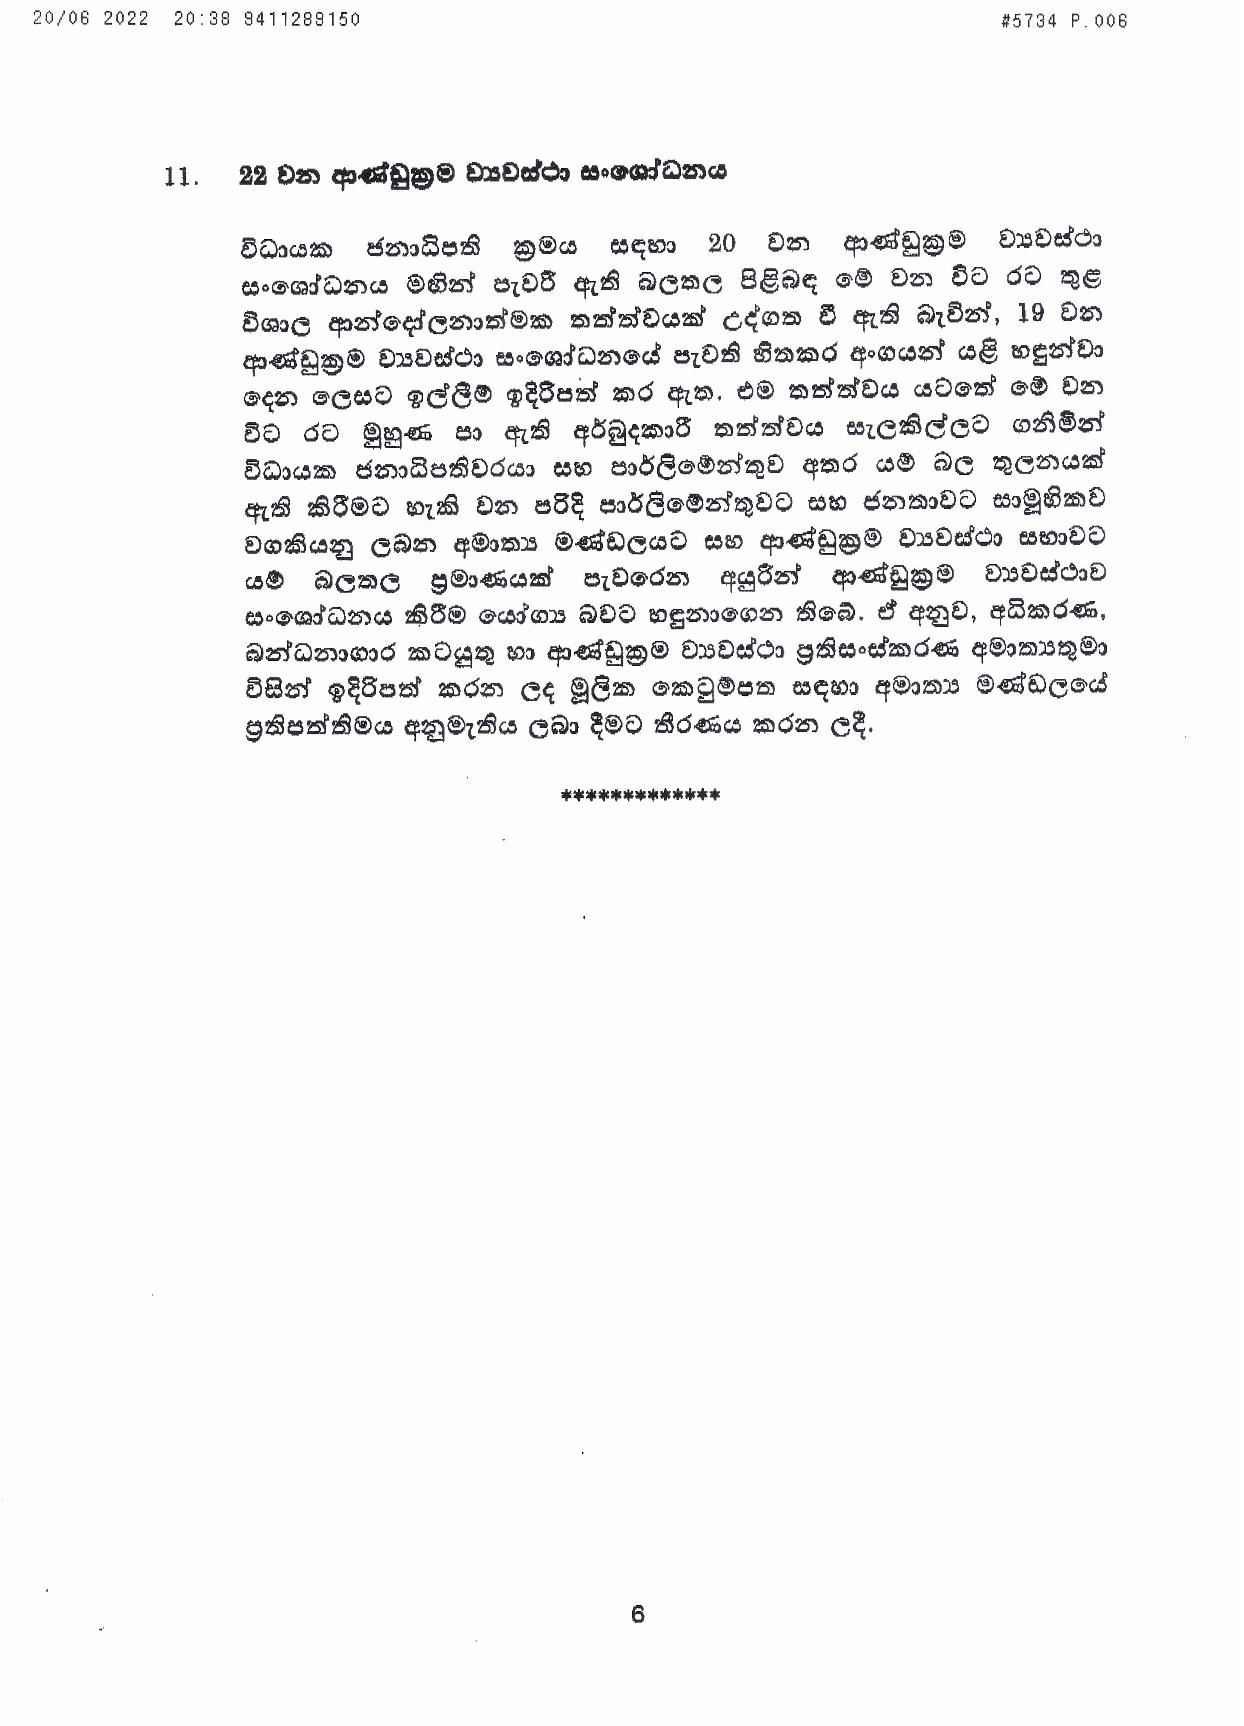 Cabinet Decision on 20.06.2022 page 006